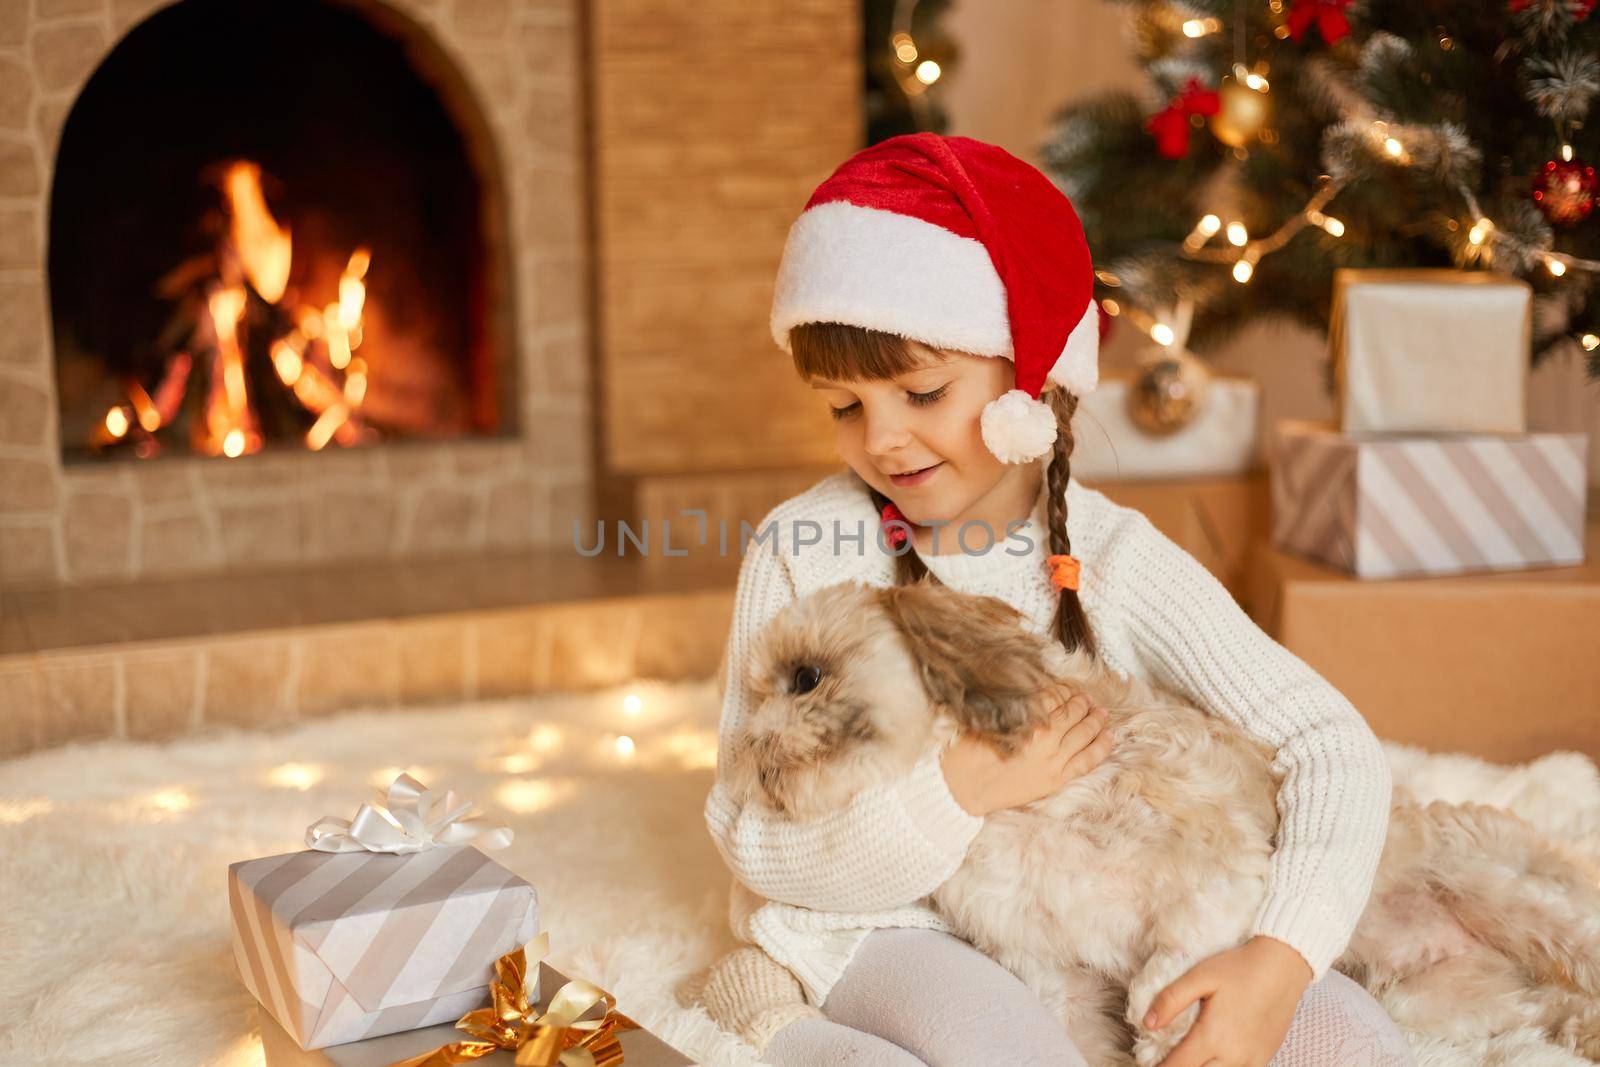 Girl with dog on New Year's Eve sitting on floor near fireplace, has Pekingese as gift, being very happy, wearing white pullover and red santa claus hat, kid looks at puppy with love.